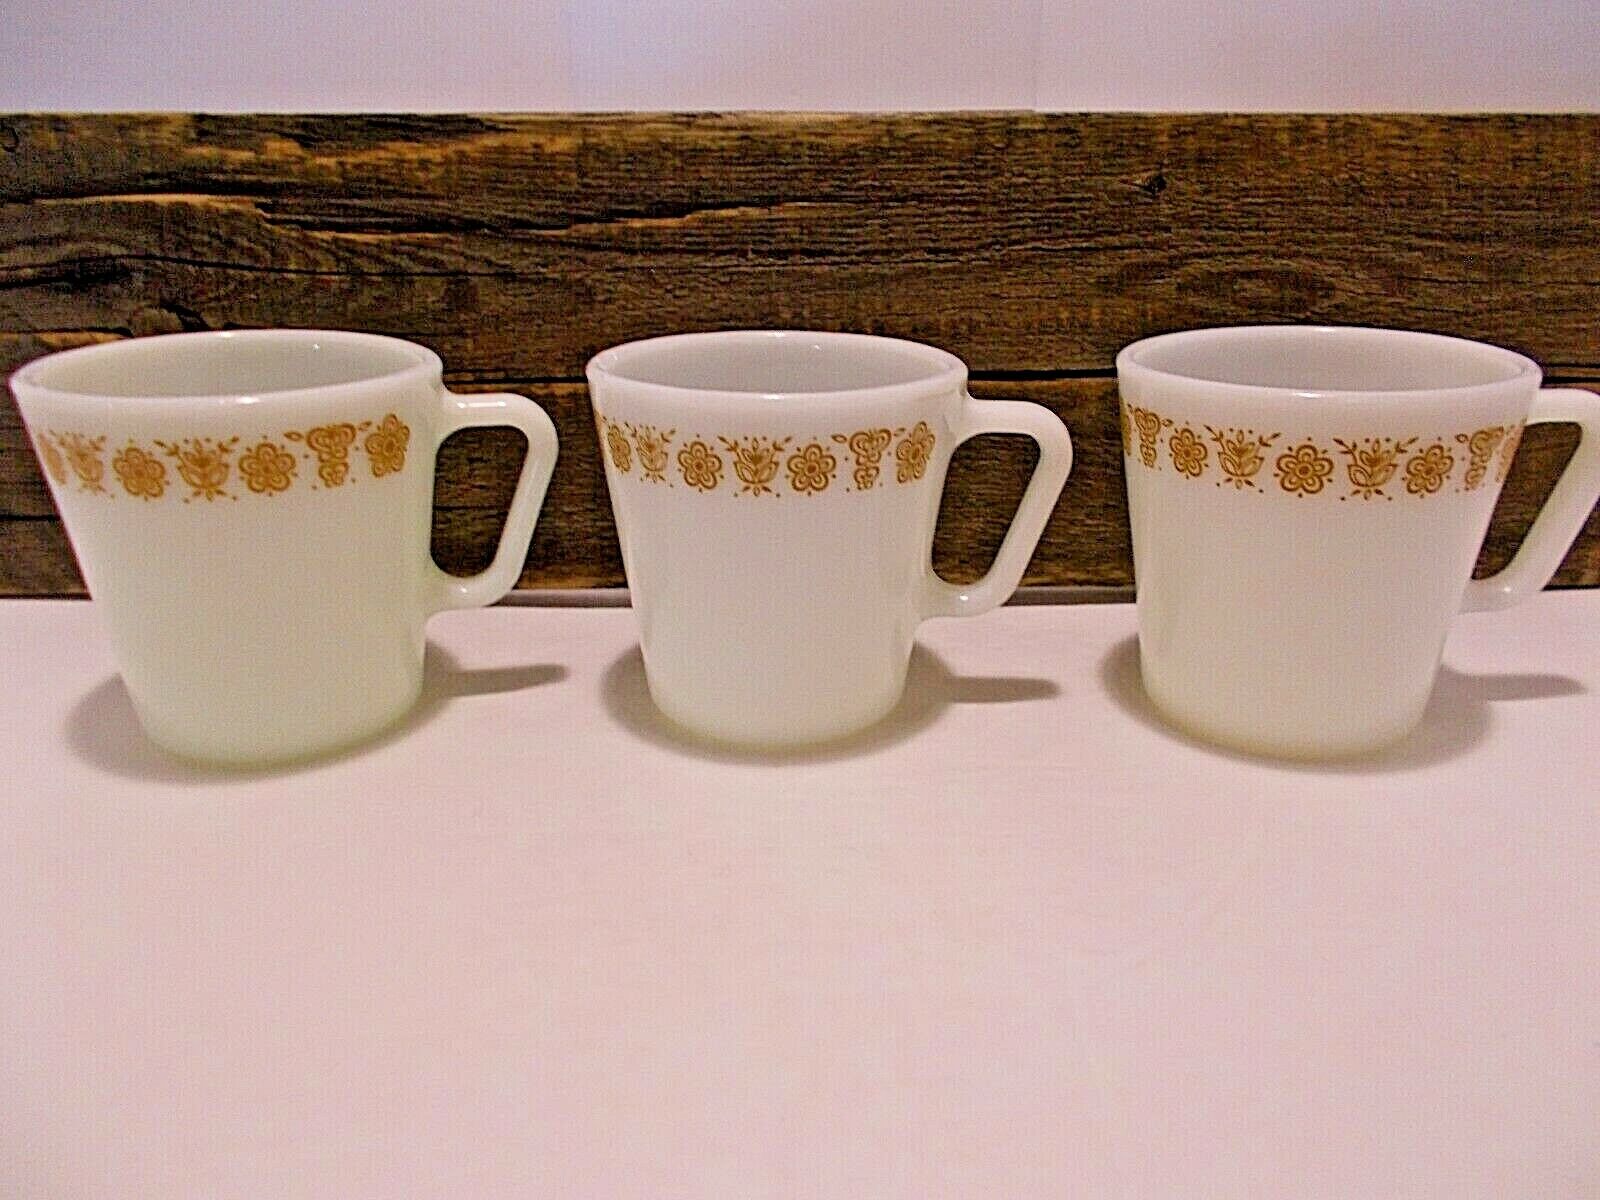 Vintage Pyrex Butterfly Gold 1 Pattern Cups – D Handle Coffee Cups Set of 3